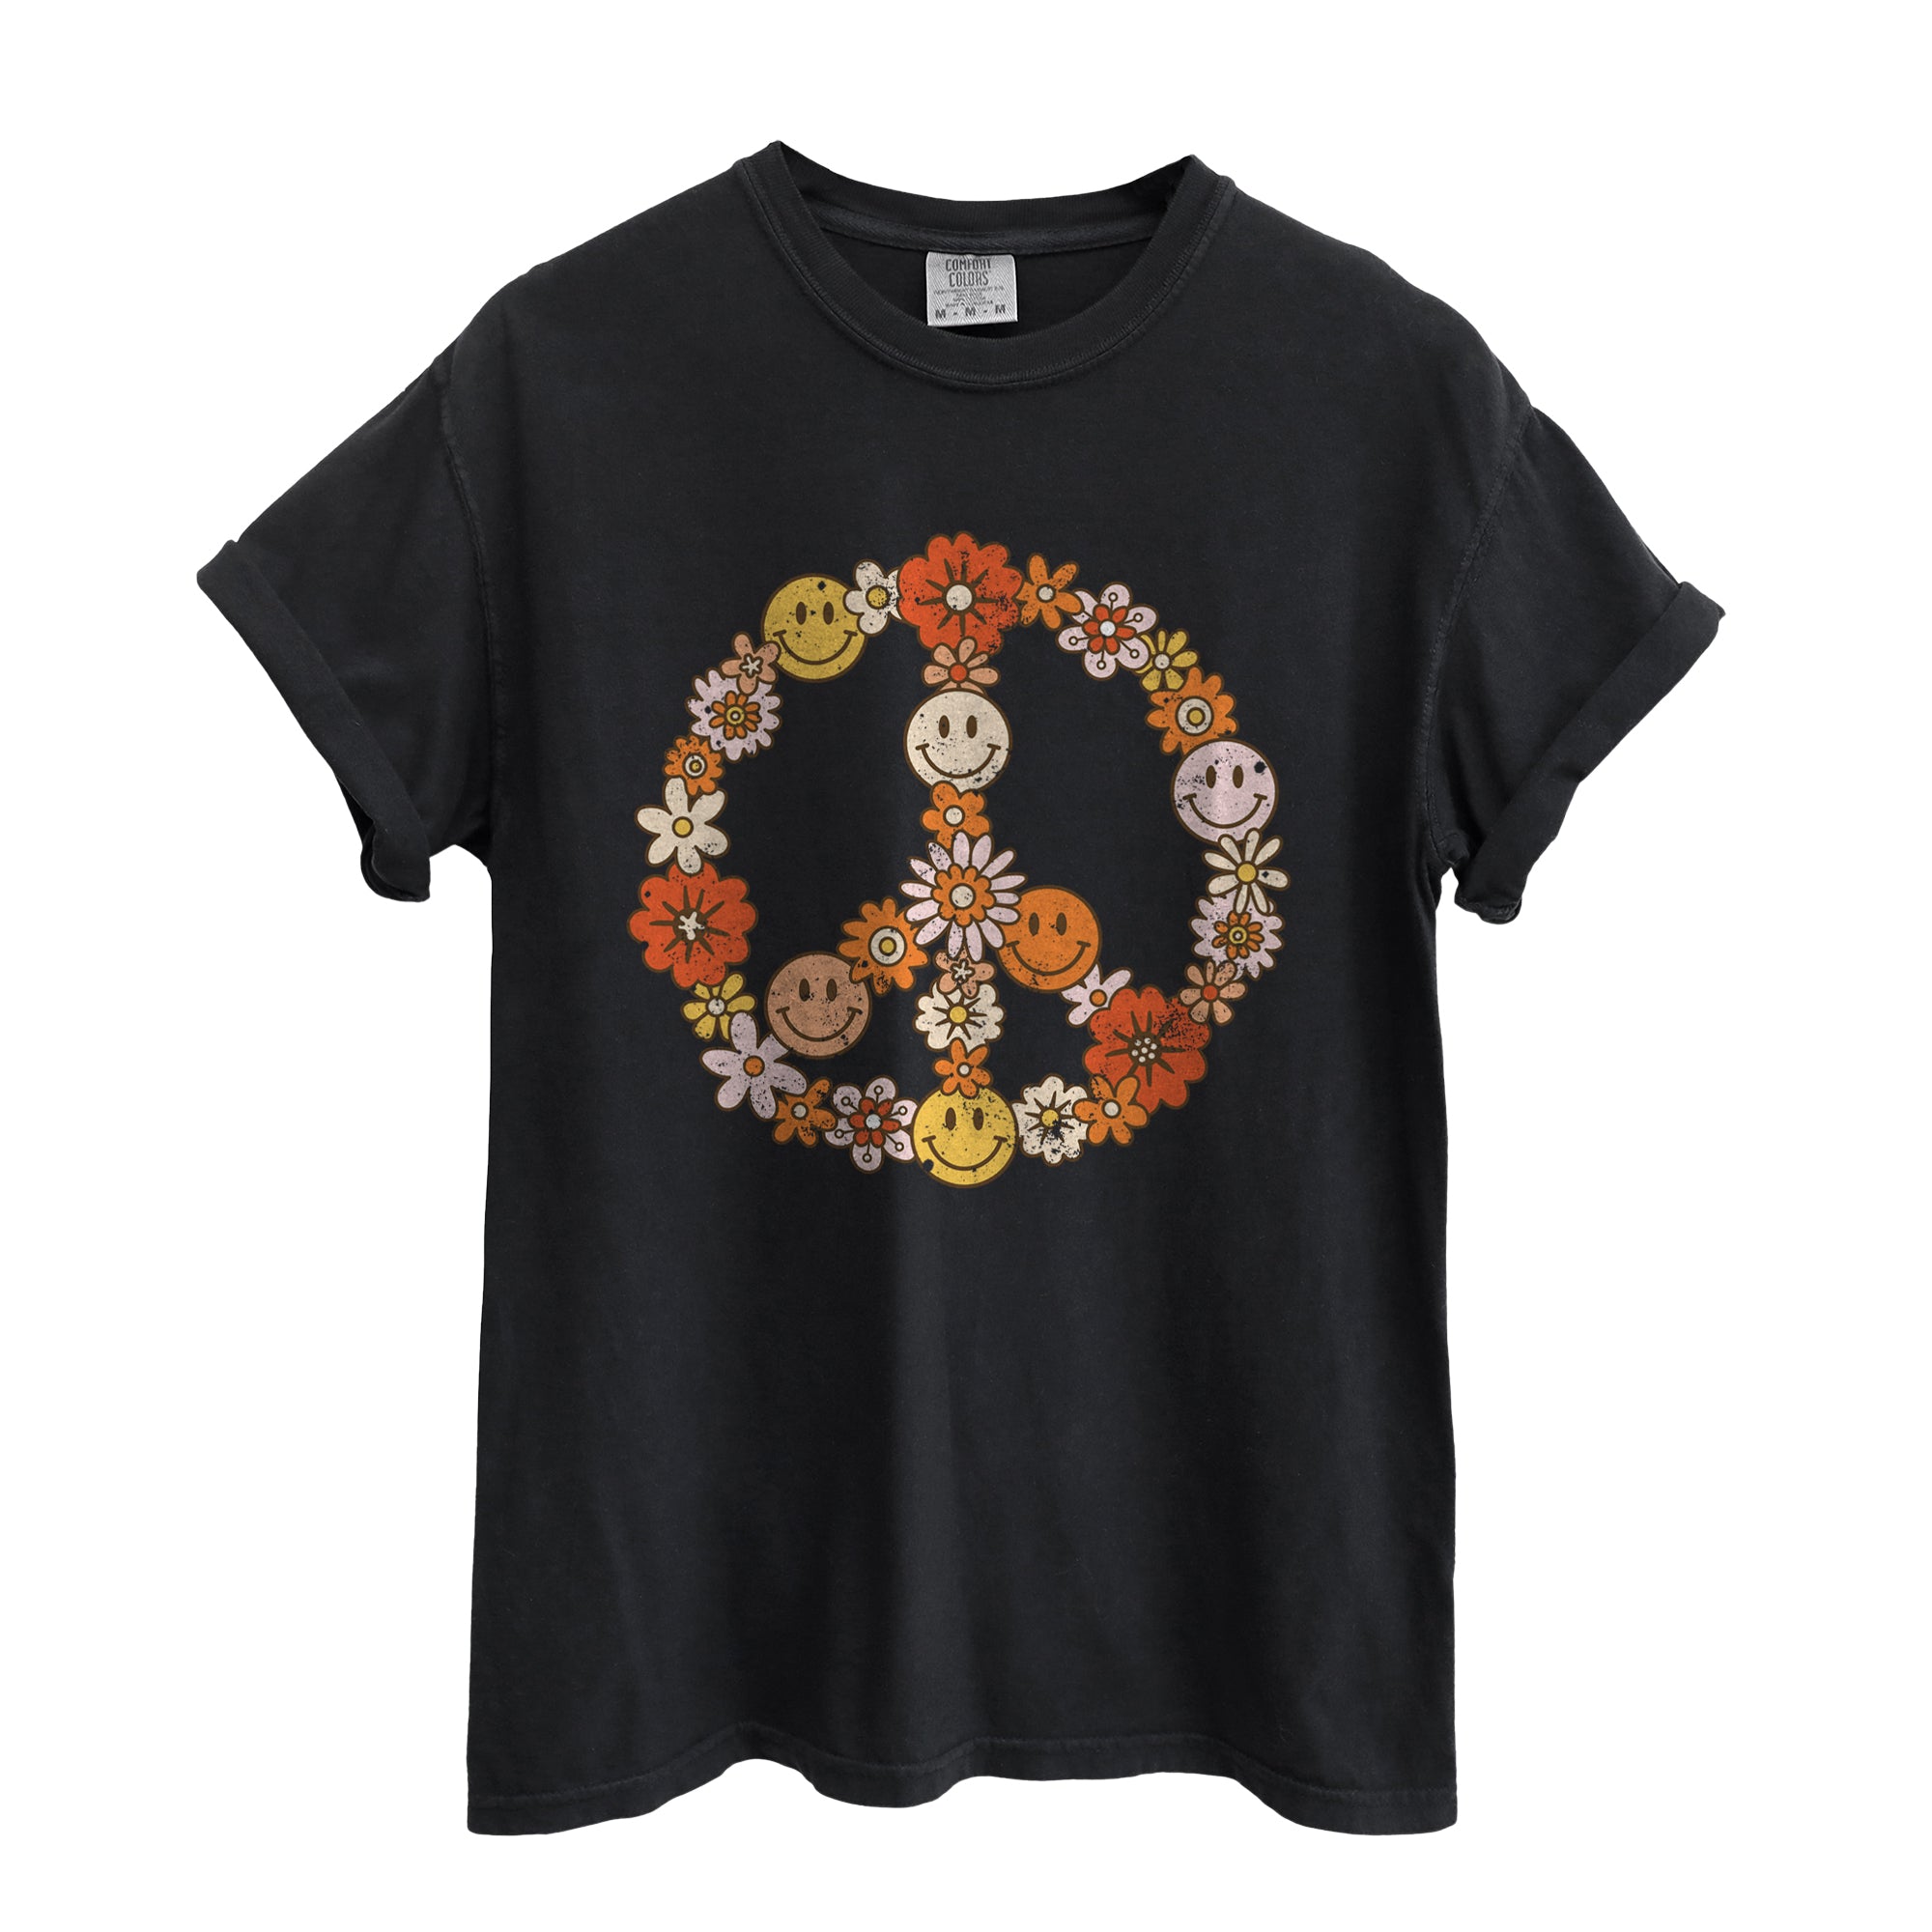 Hippie Peace Oversized Shirt for Women Garment-Dyed Graphic Tee